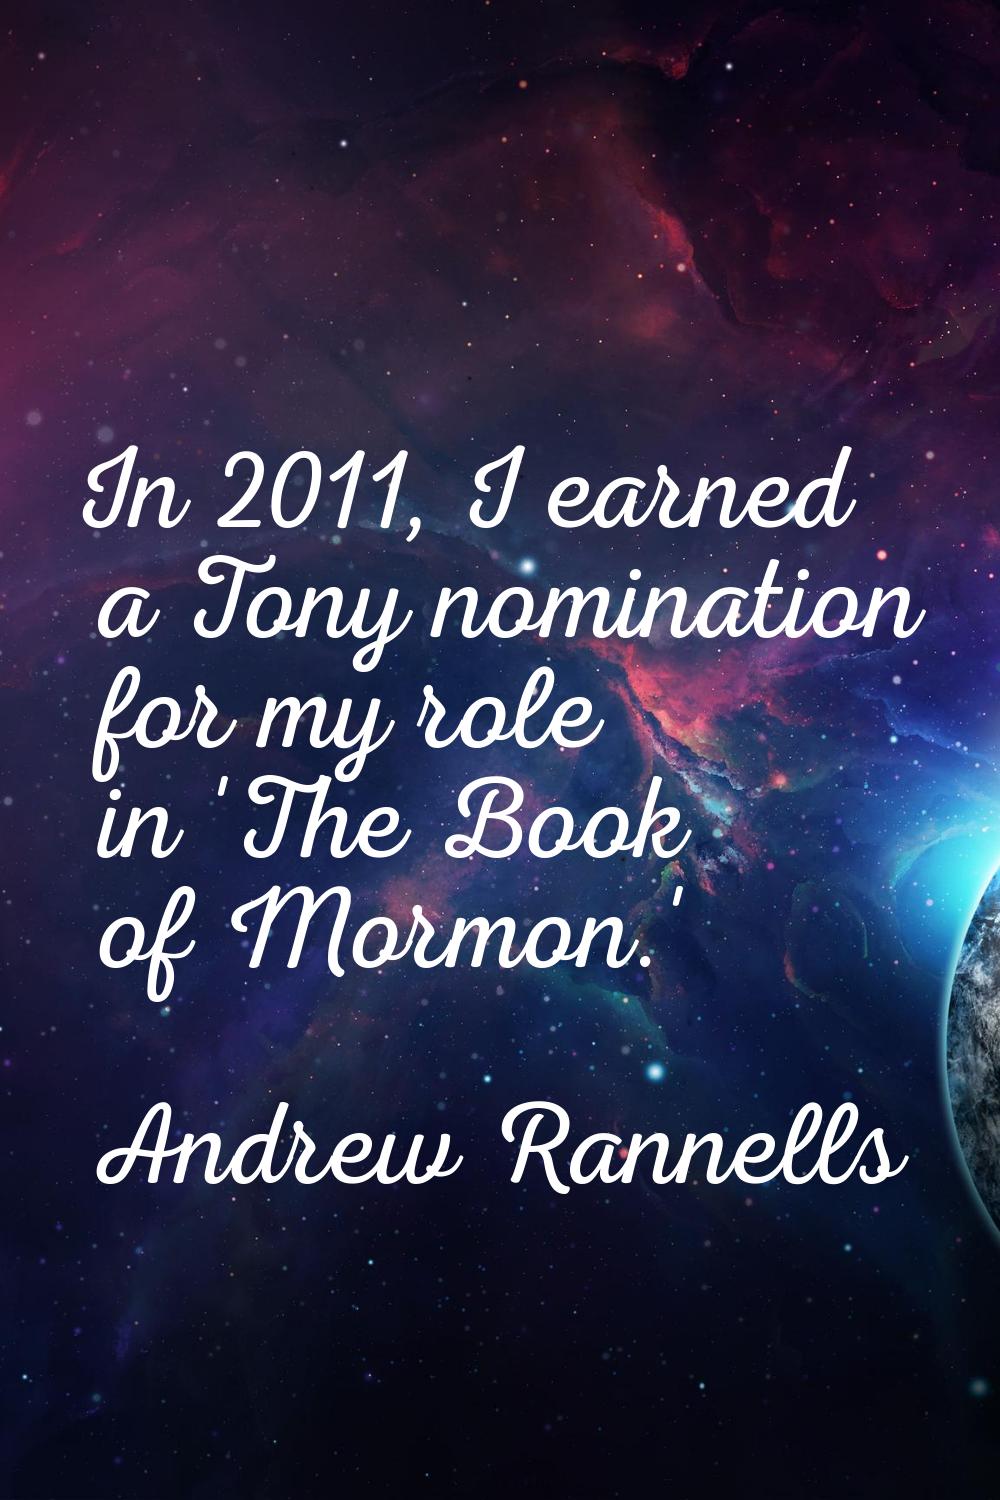 In 2011, I earned a Tony nomination for my role in 'The Book of Mormon.'